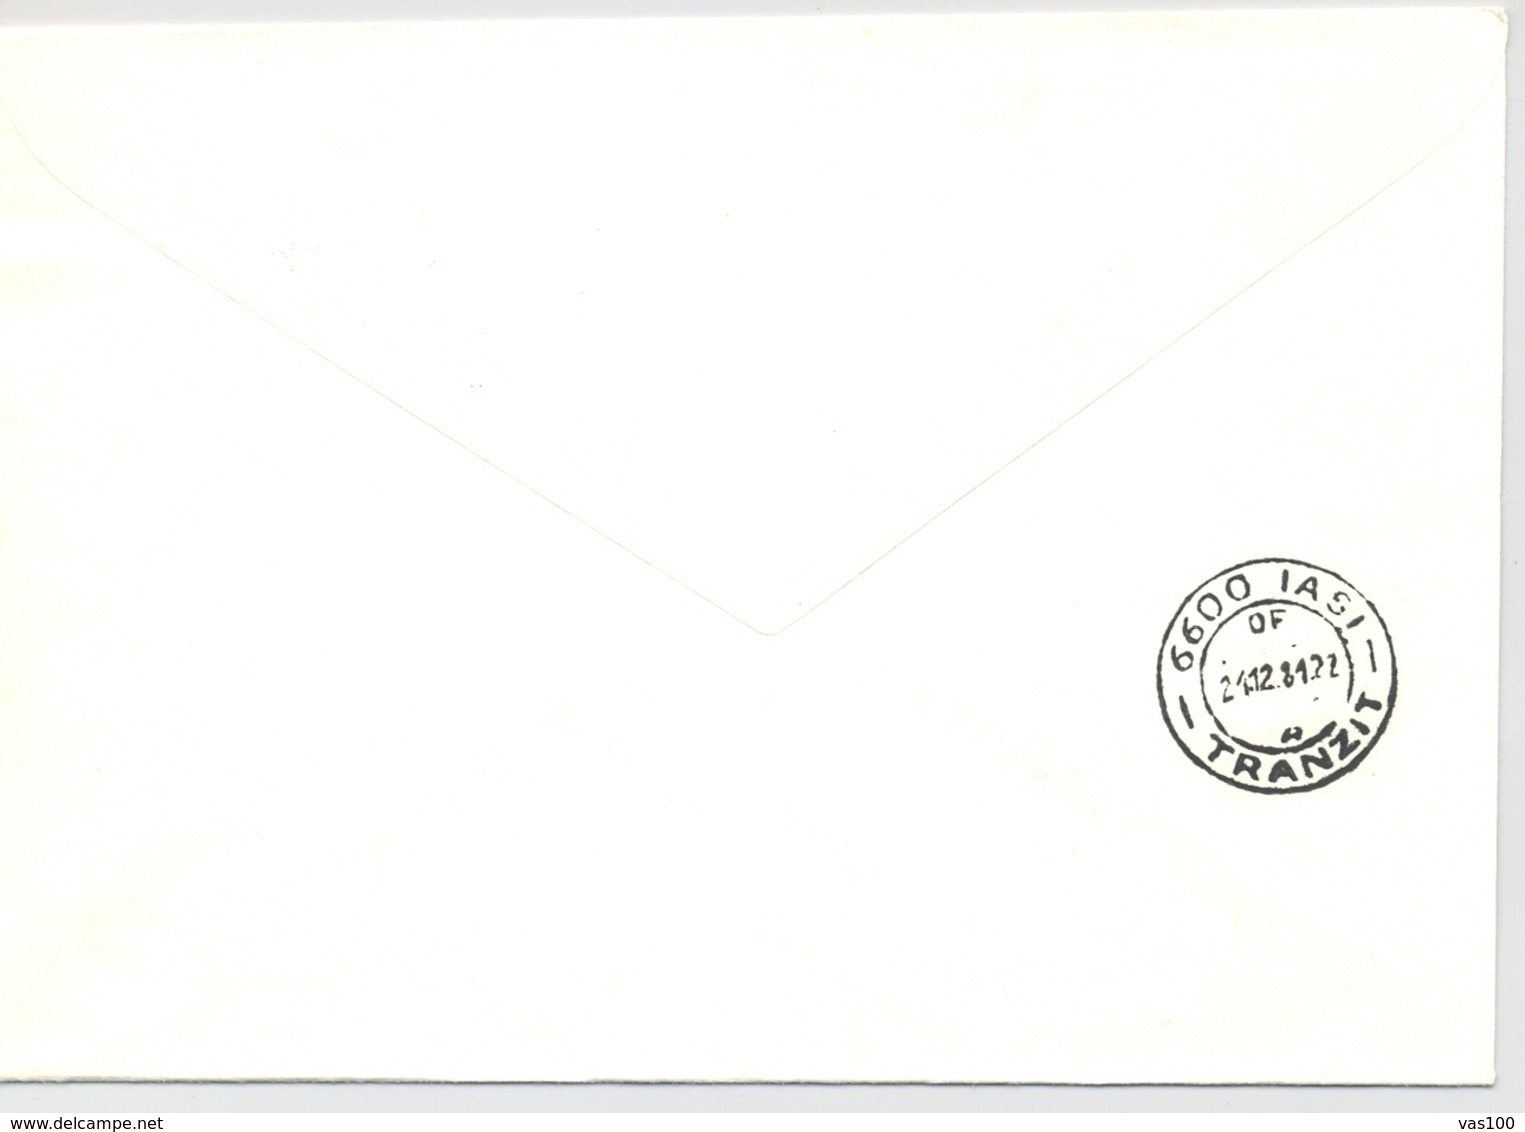 PEACE ON EARTH PHILATELIC EXHIBITION SPECIAL POSTMARK, ENDLESS COLUMN STAMP ON COVER, 1981, ROMANIA - Lettres & Documents